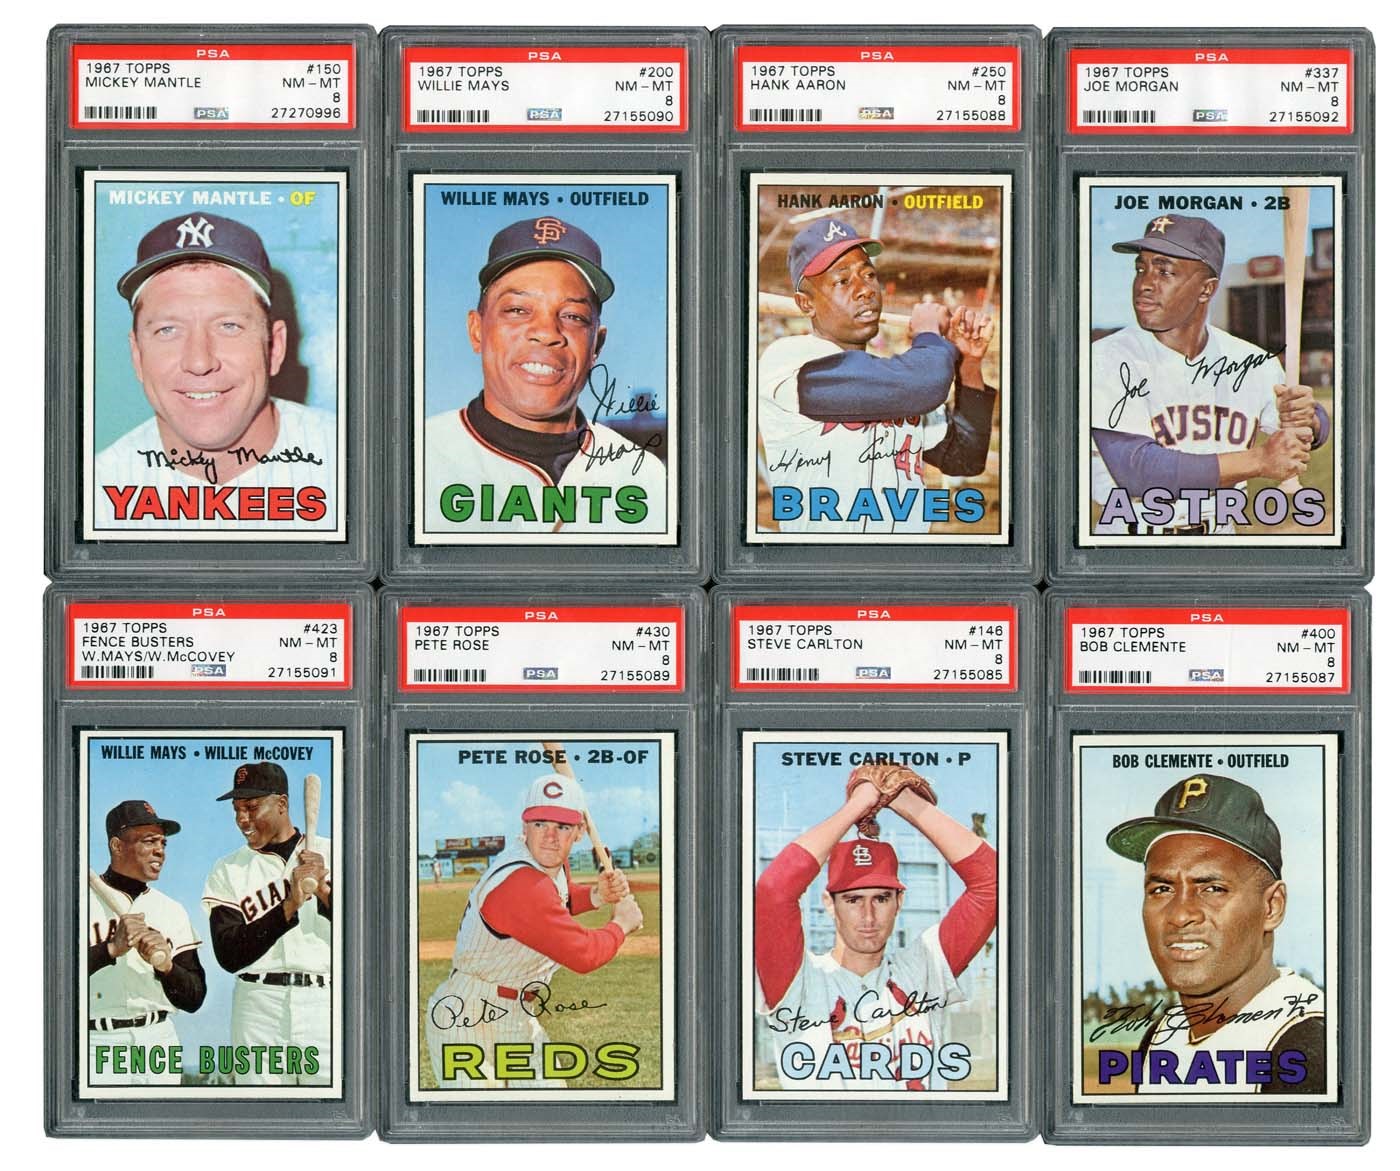 - 1967 Topps VERY HIGH GRADE Partial Set with PSA 8 Mantle!